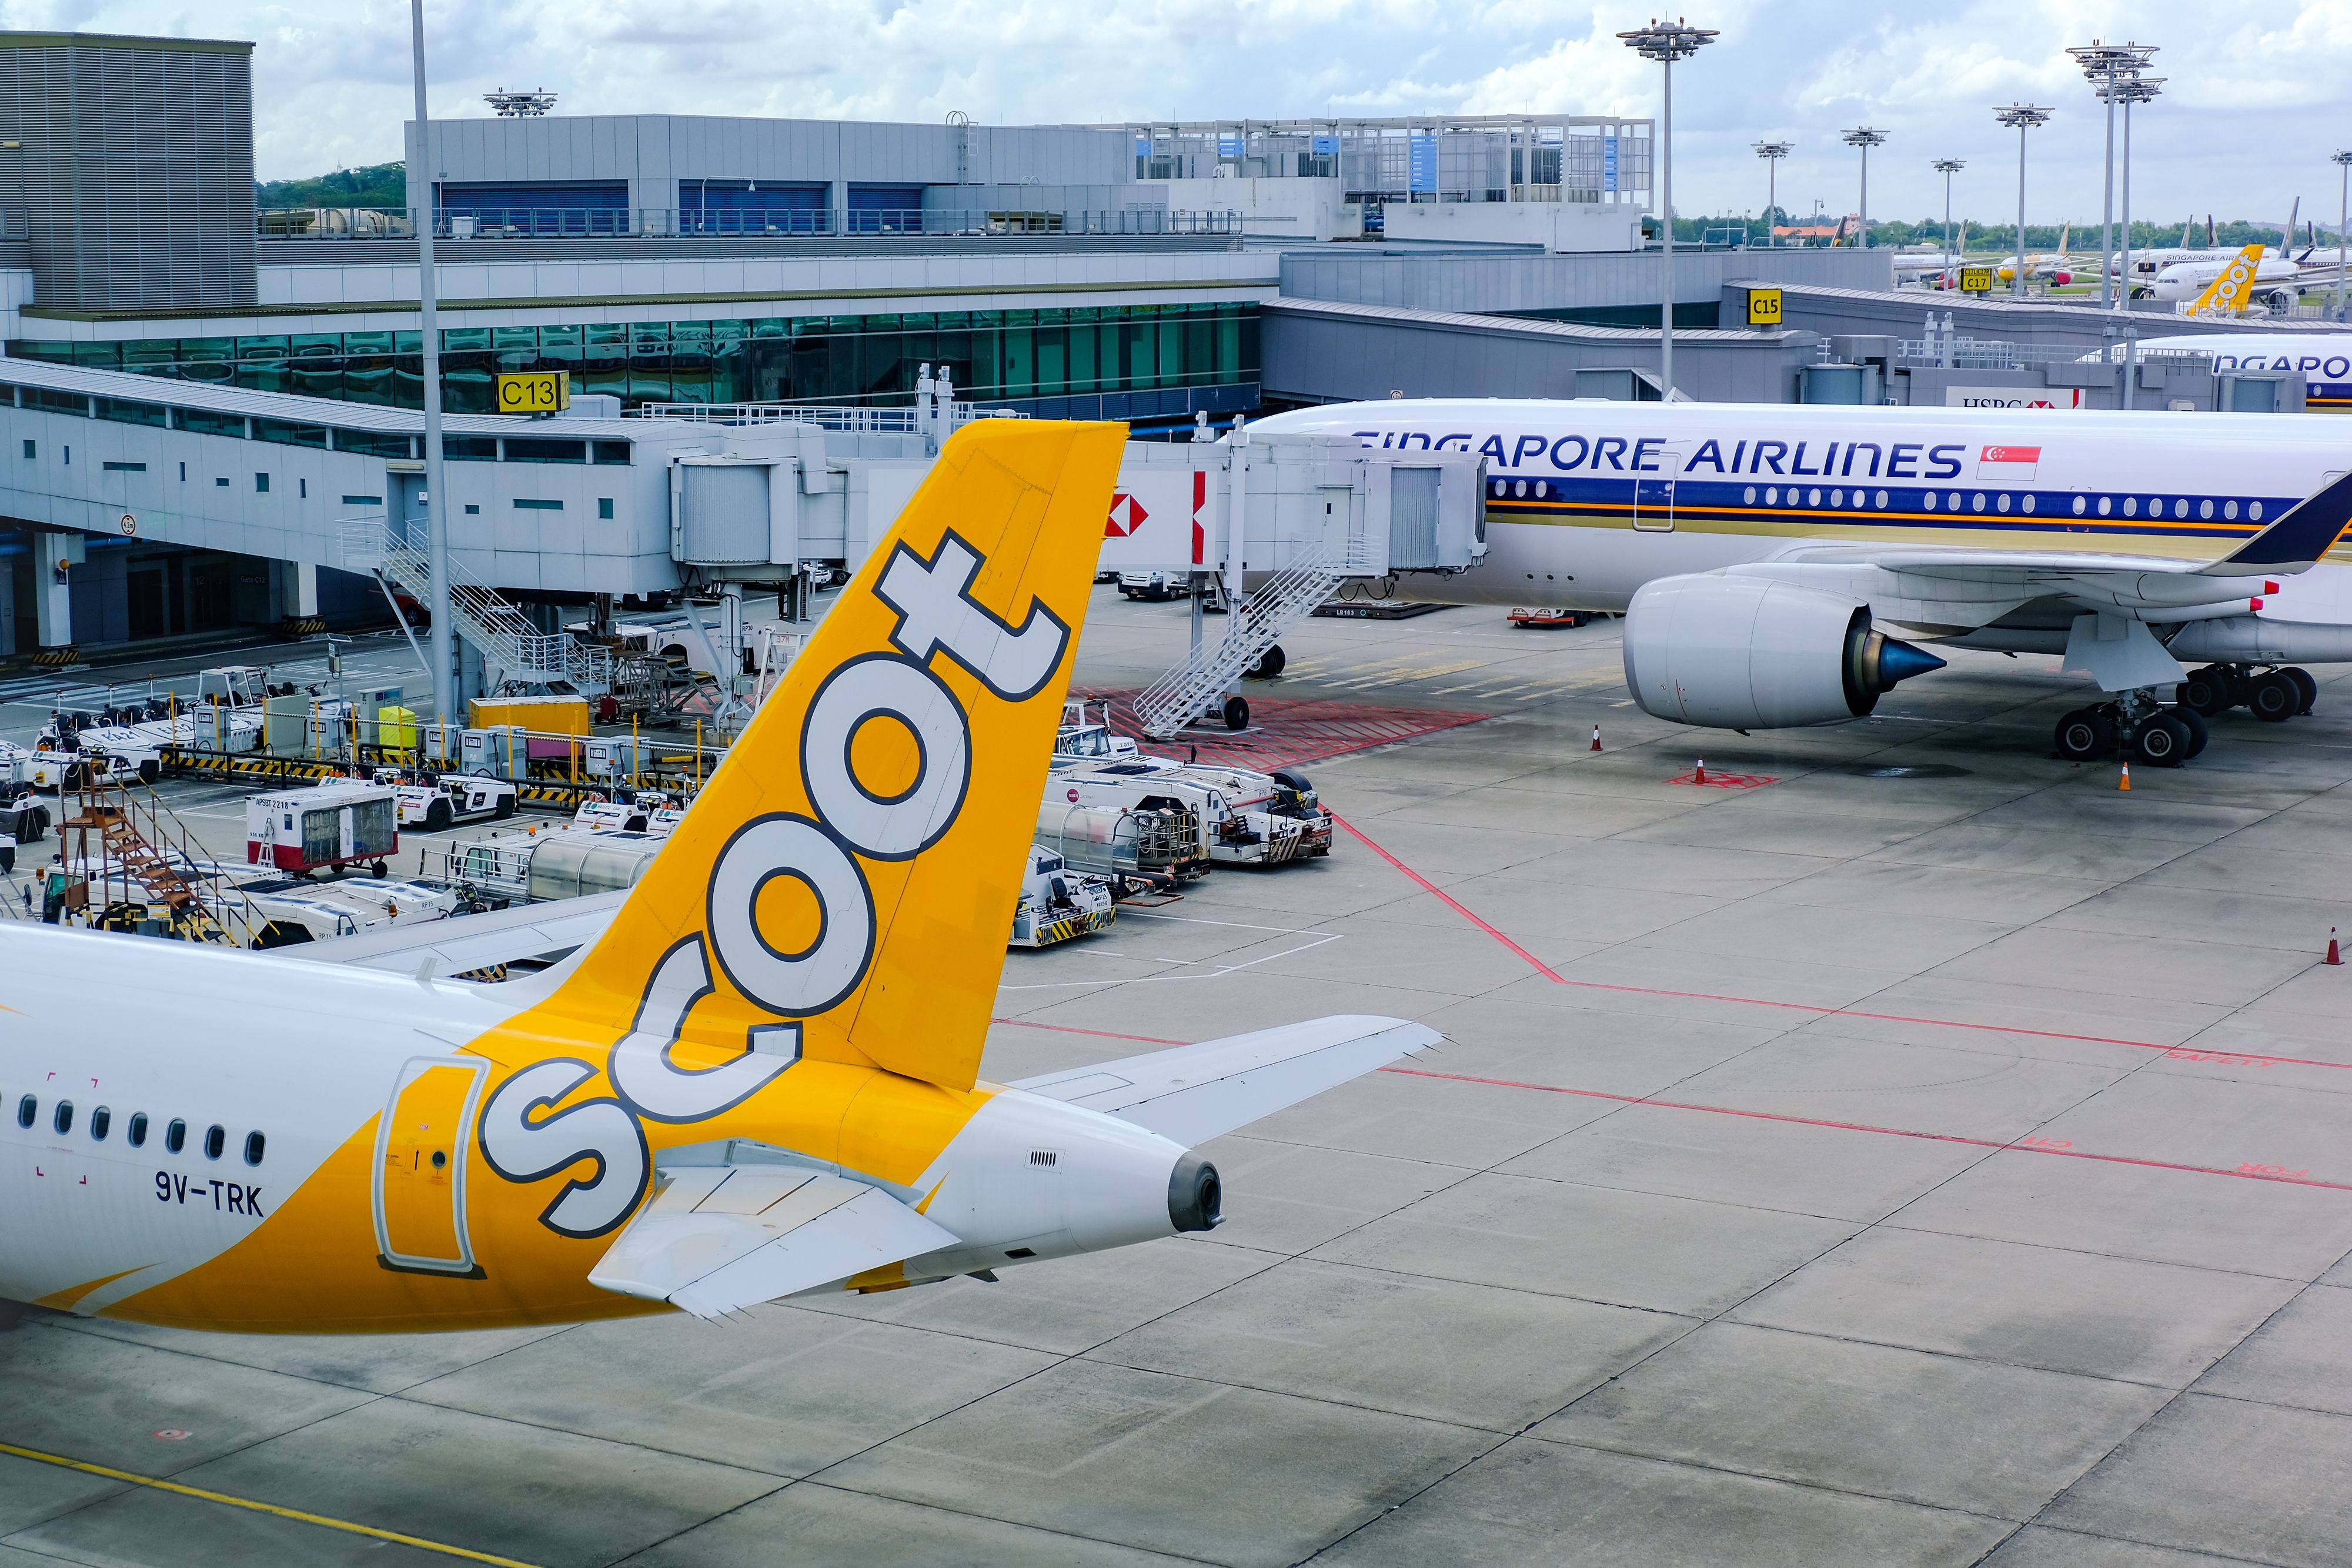 Scoot and Singapore Airlines planes parked at Changi Airport 